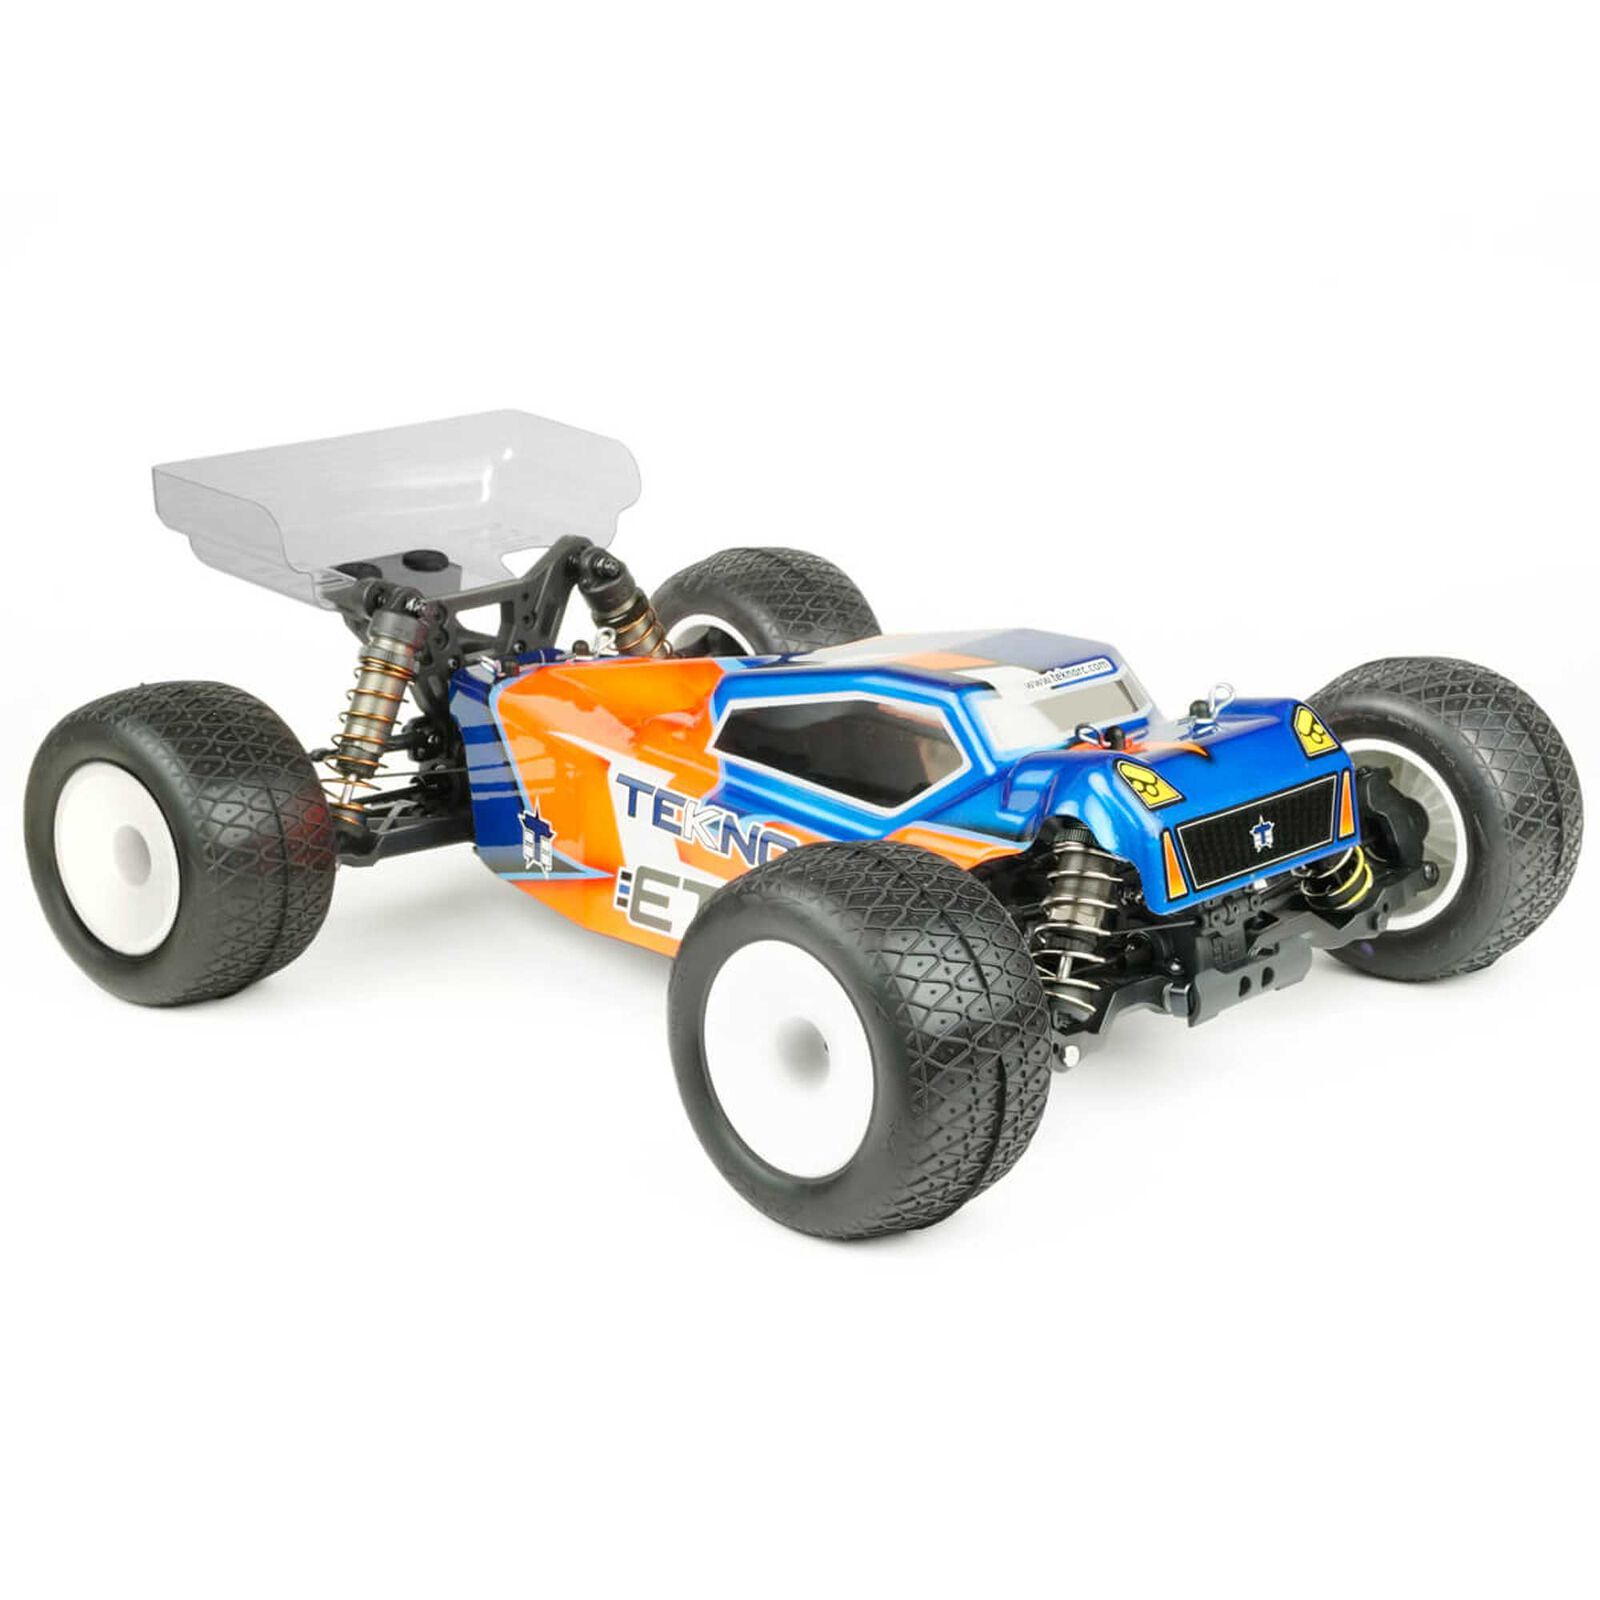 Tekno RC ET410.2 1/10th 4WD Competition Electric Truggy Kit for sale online TKR7202